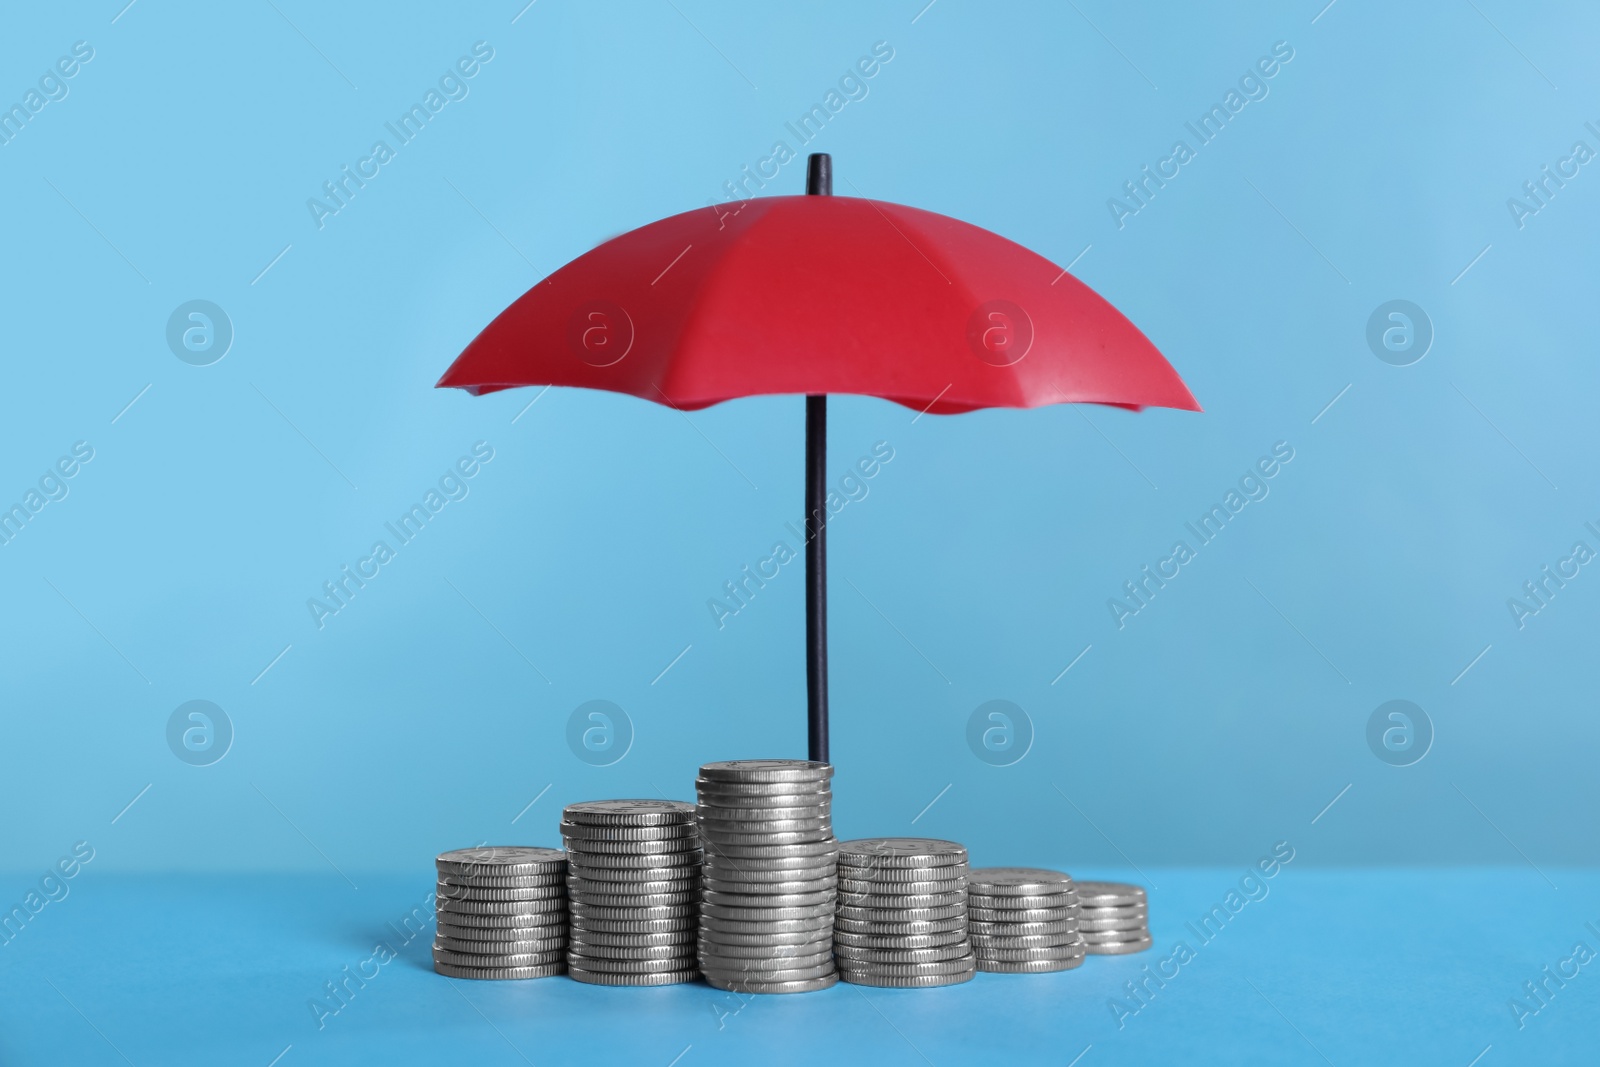 Photo of Small umbrella and coins on light blue background